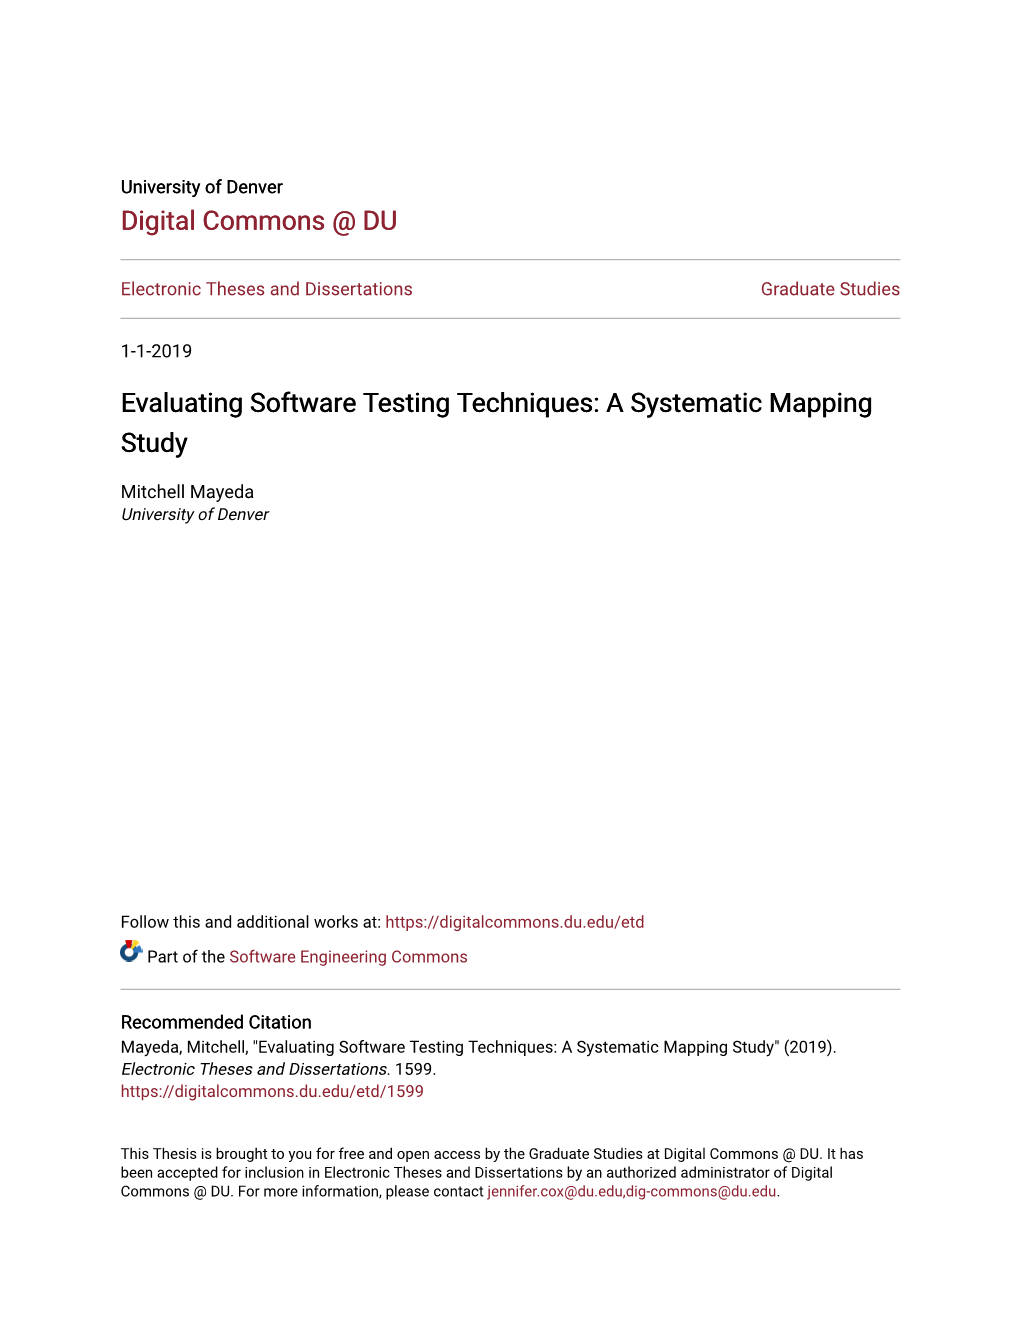 Evaluating Software Testing Techniques: a Systematic Mapping Study